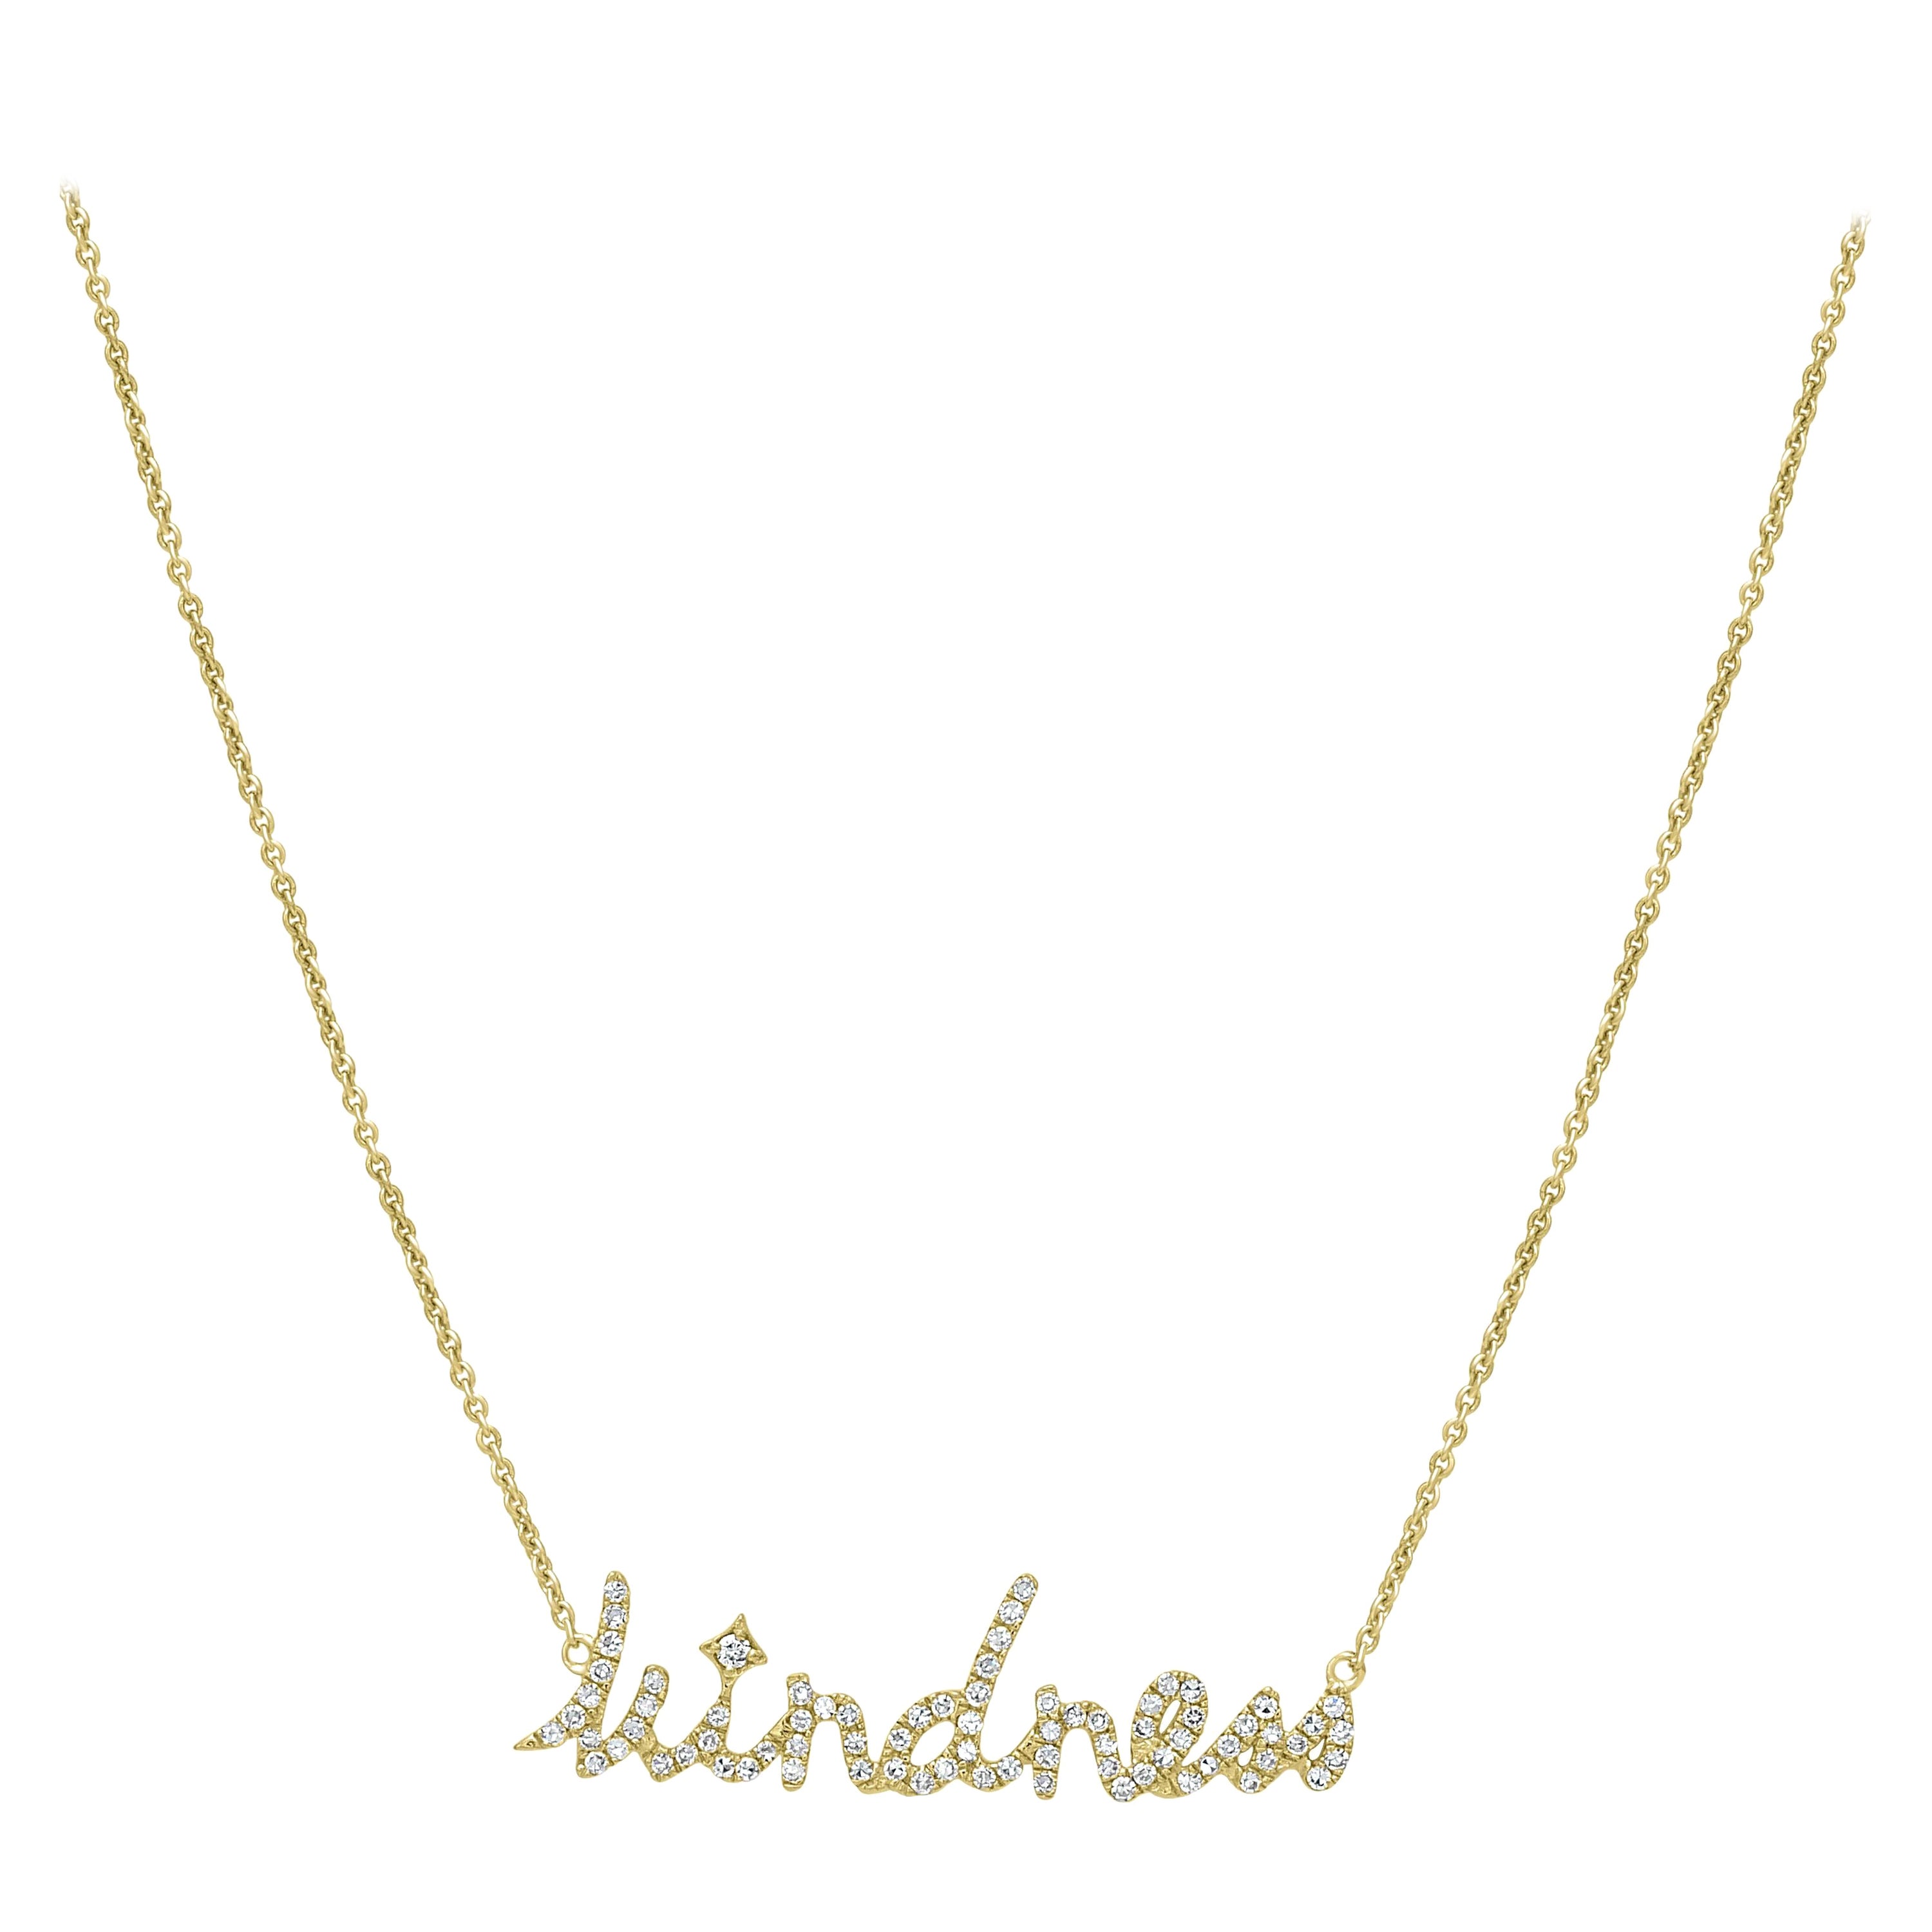 Luxle Kindness Diamond Pendant Necklace in 14k Yellow Gold For Sale